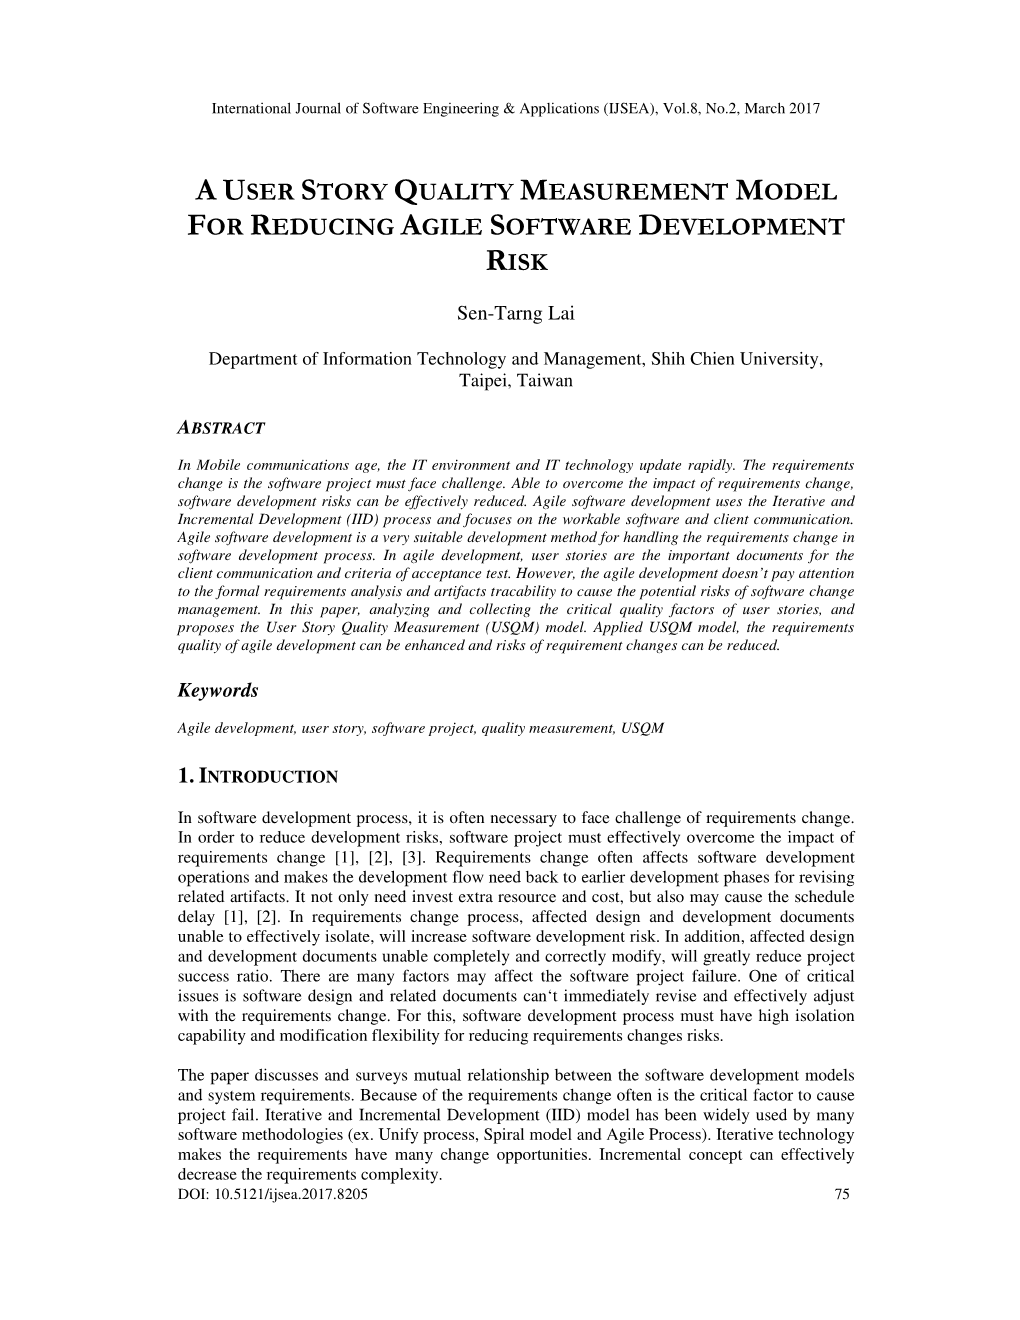 A User Story Quality Measurement Model for Reducing Agile Software Development Risk